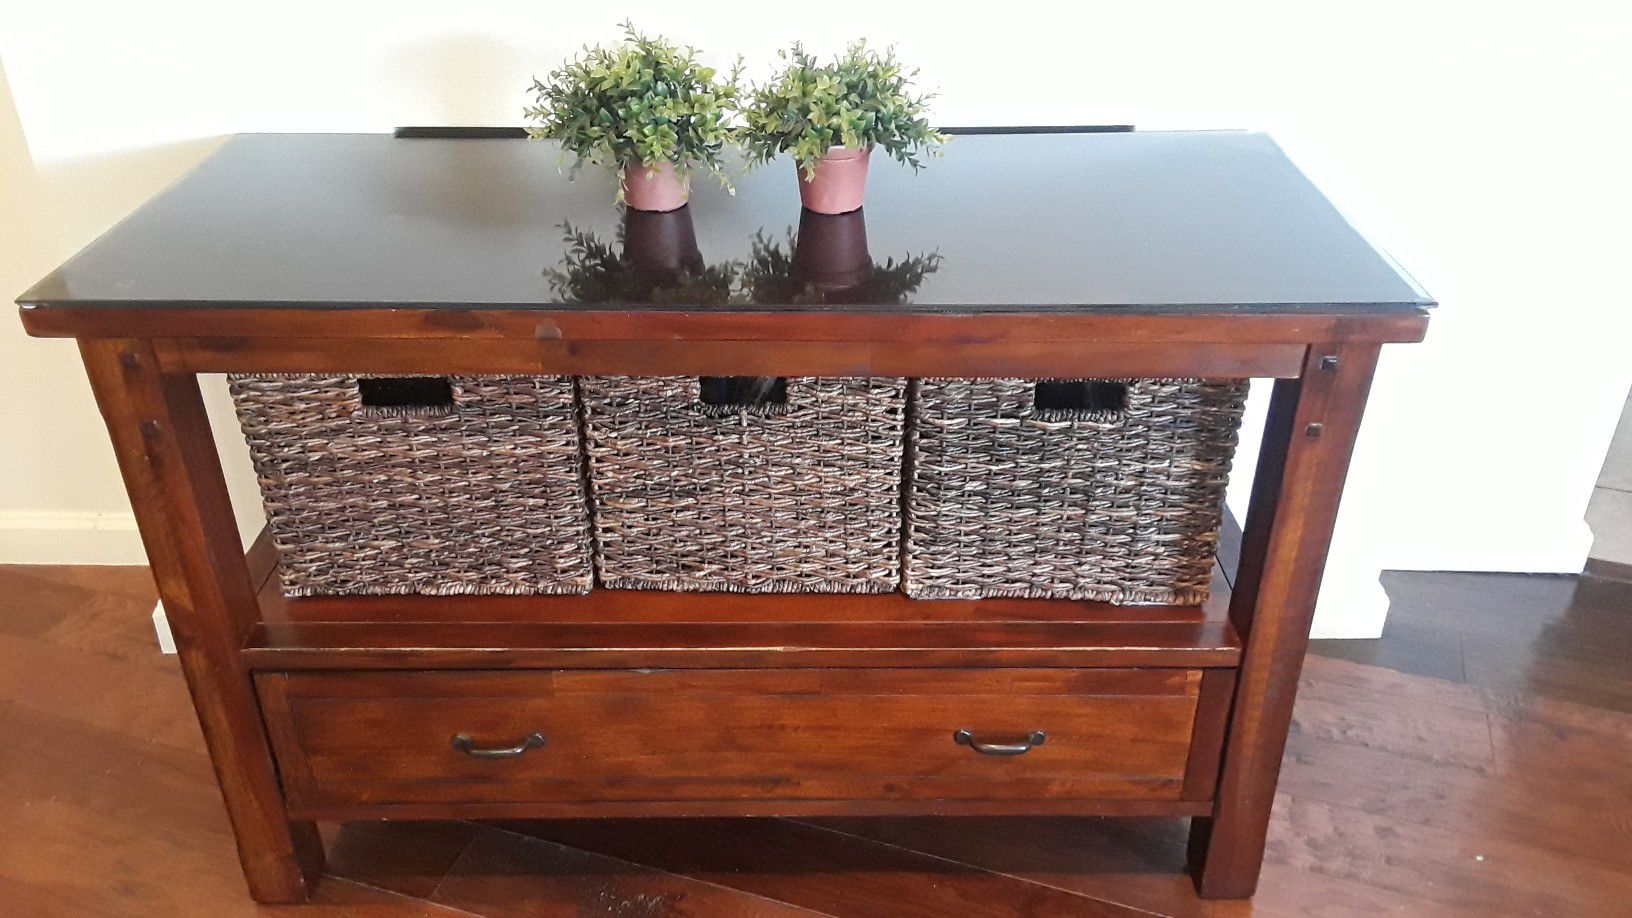 Tv stand or storage table